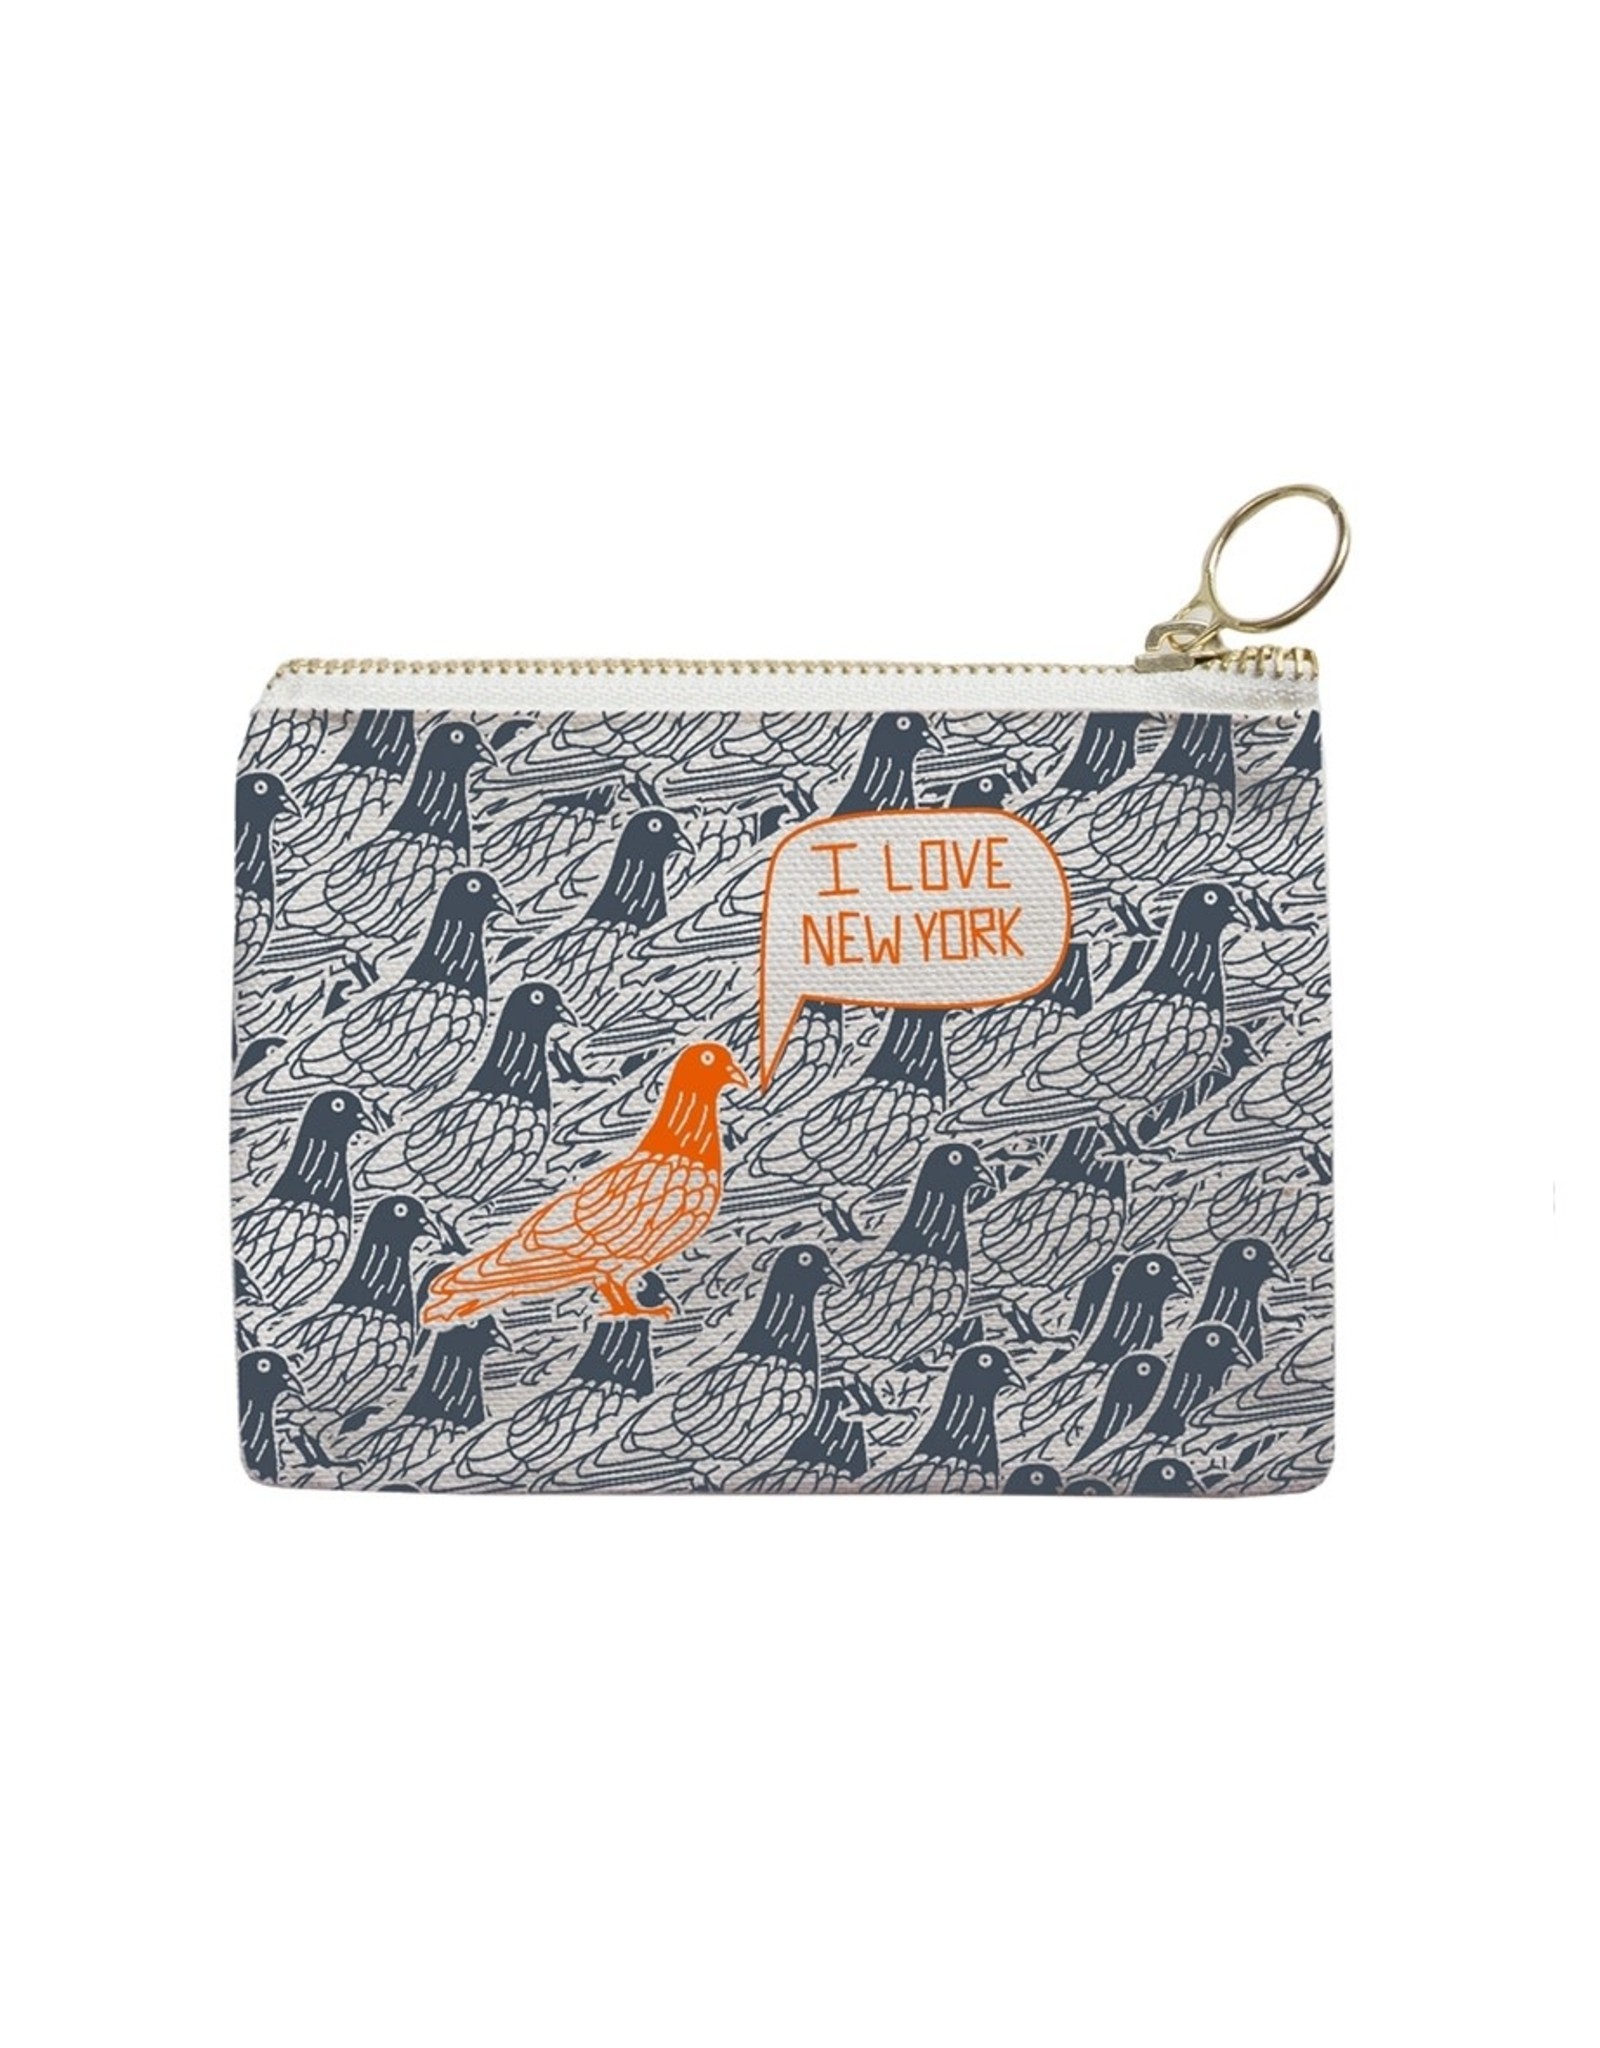 Maptote Maptote, New York City Coin Purse Grey And Orange